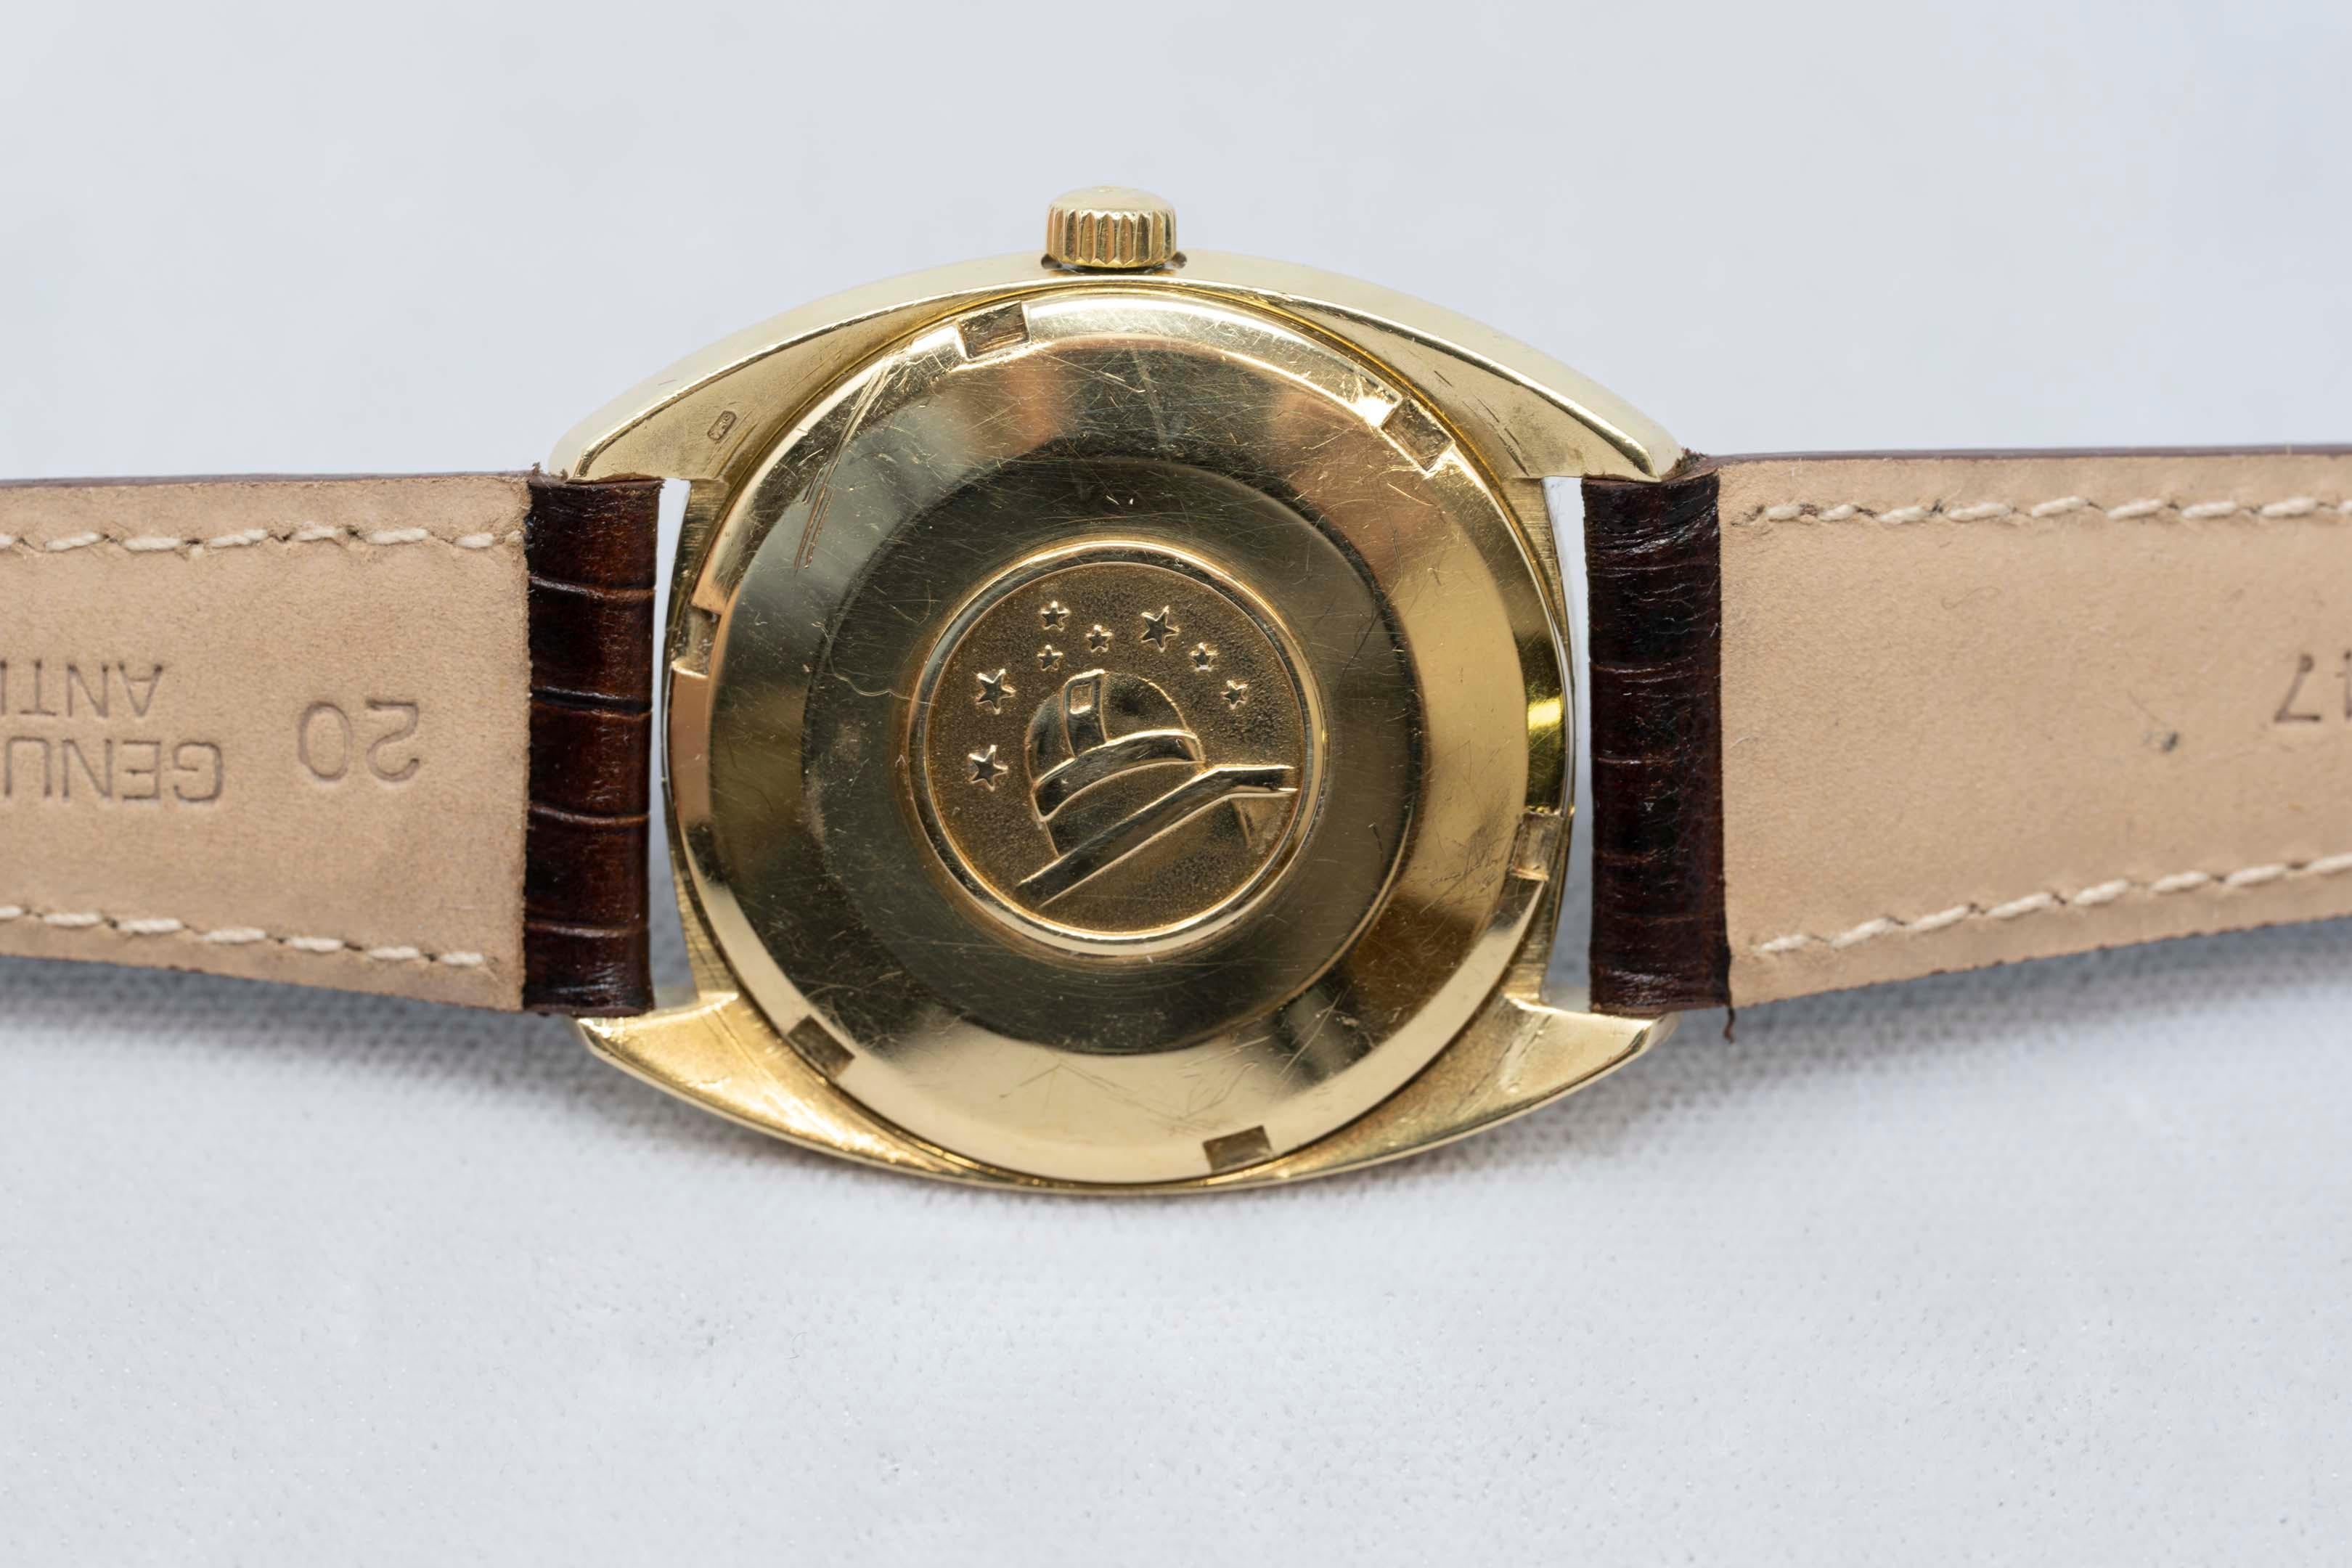 18k Gold Men's Watch Omega Constellation Chronometer In Good Condition For Sale In Montreal, QC